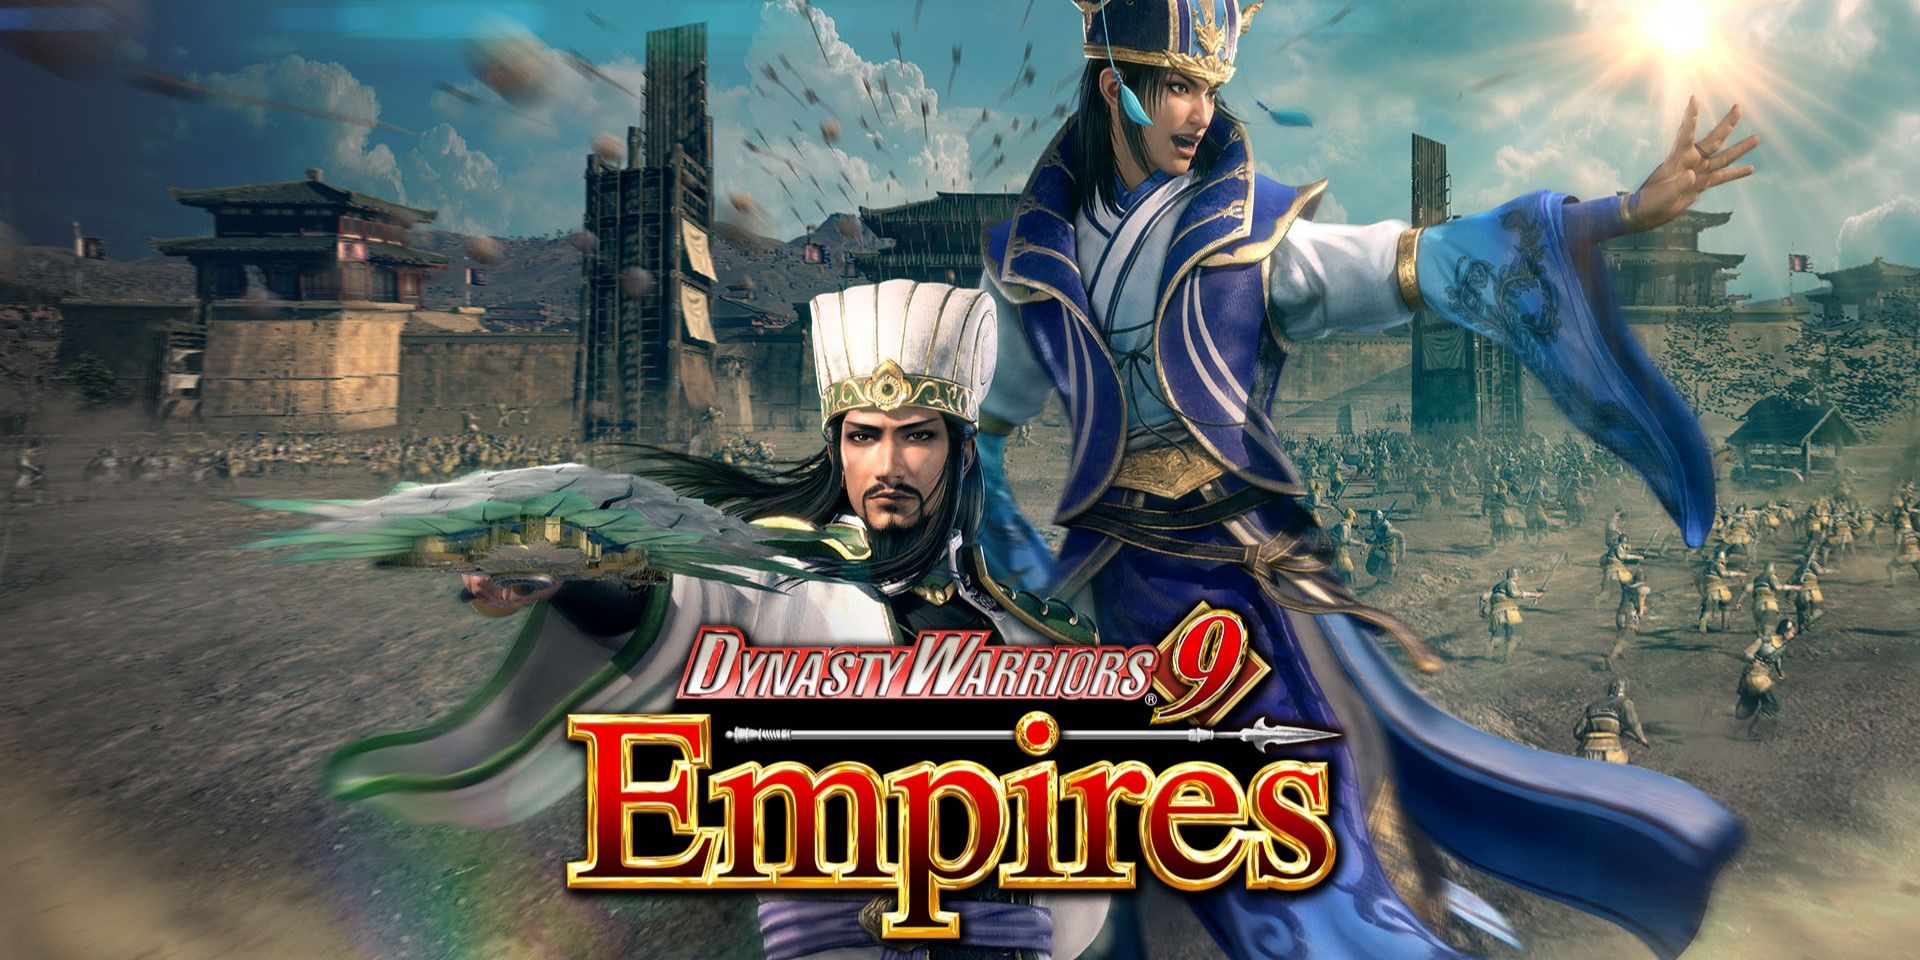 Dynasty Warriors 9 Empires title pages with logo.